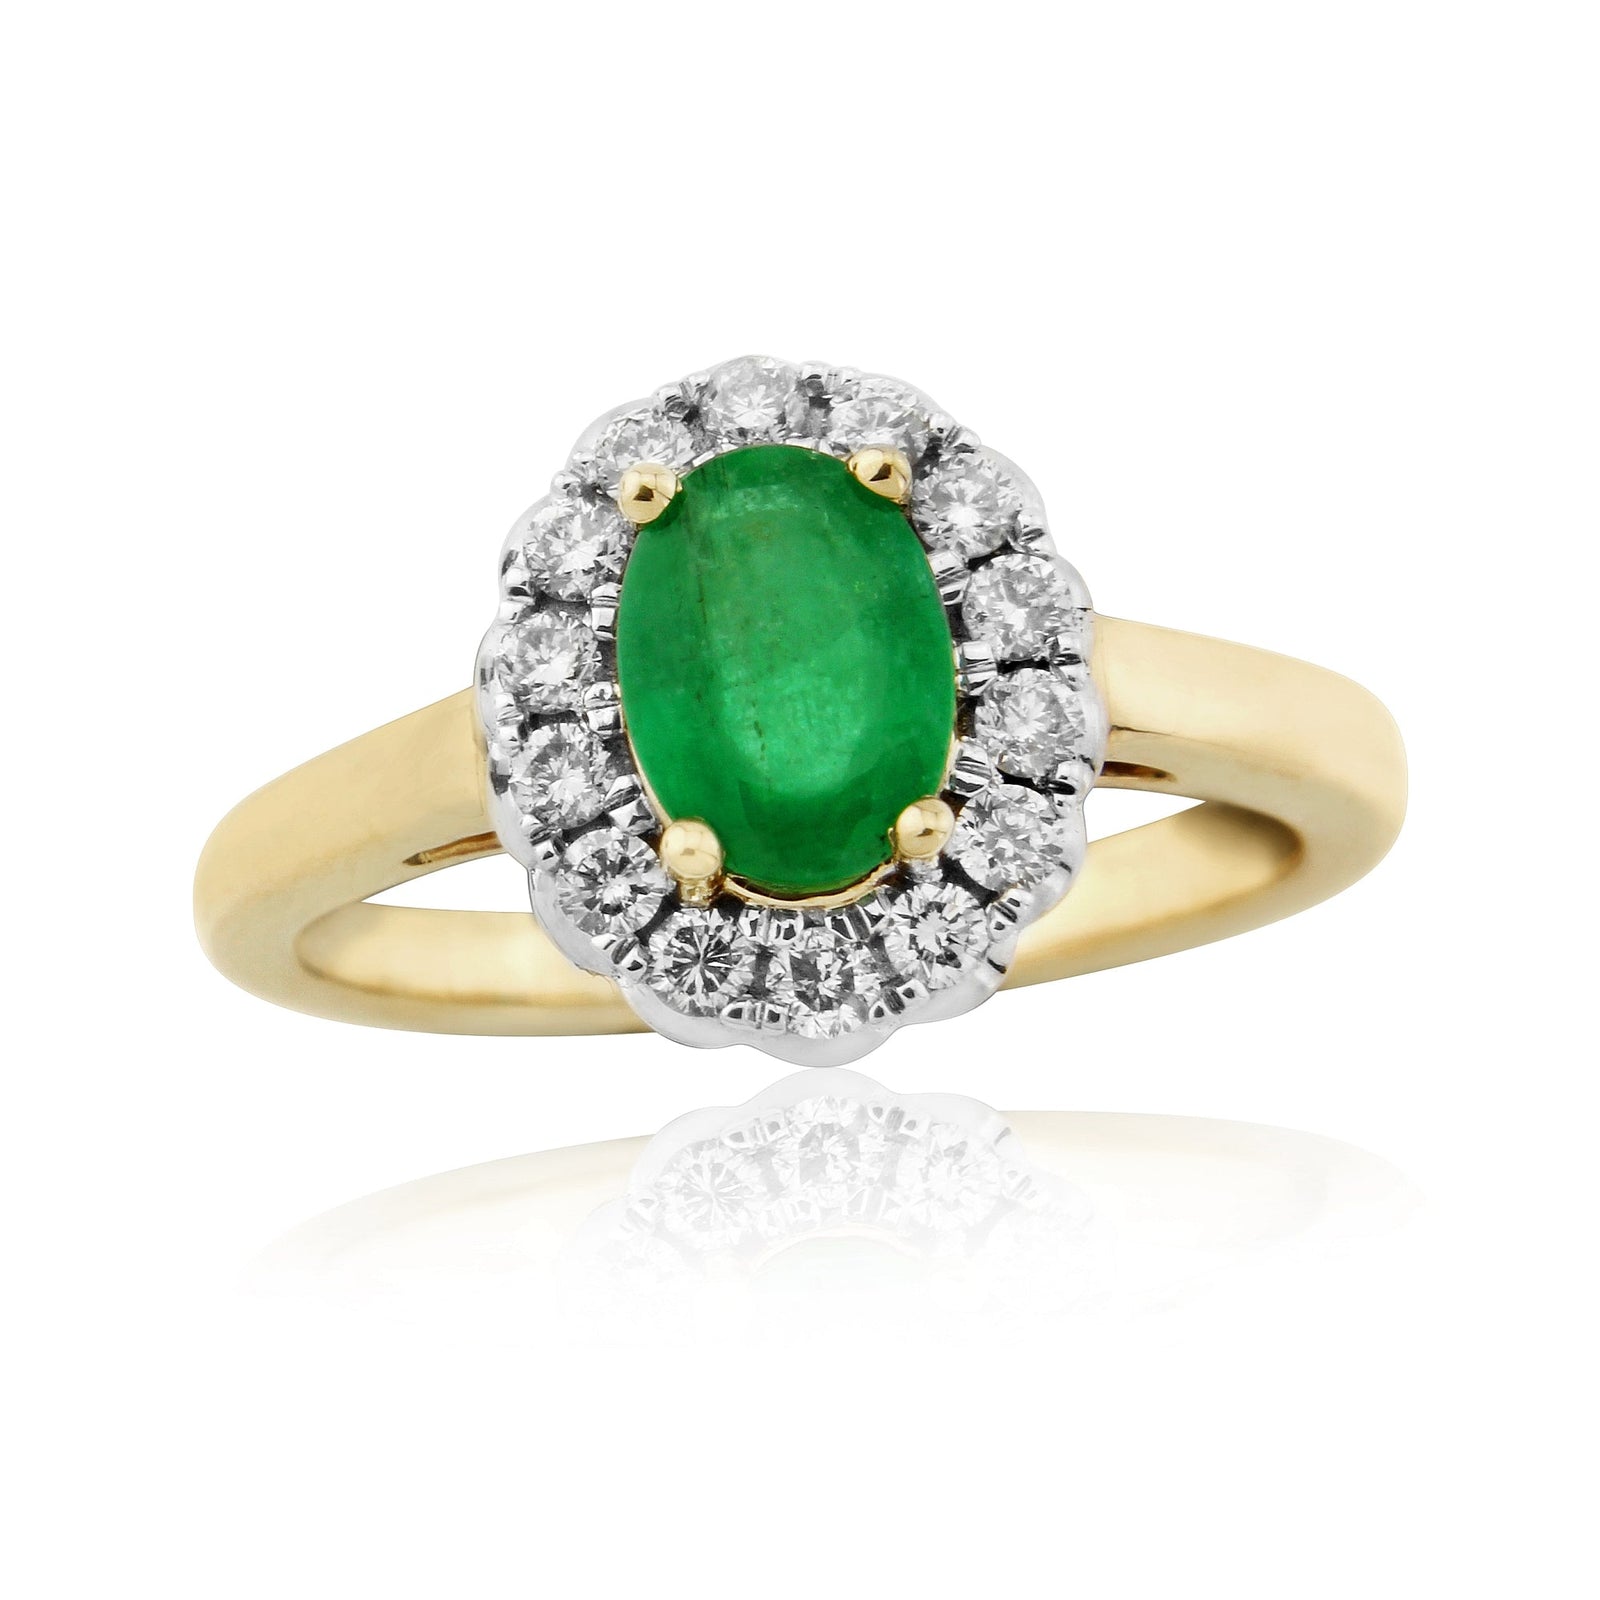 9ct gold 7x5 oval emerald & diamond cluster ring 0.29ct